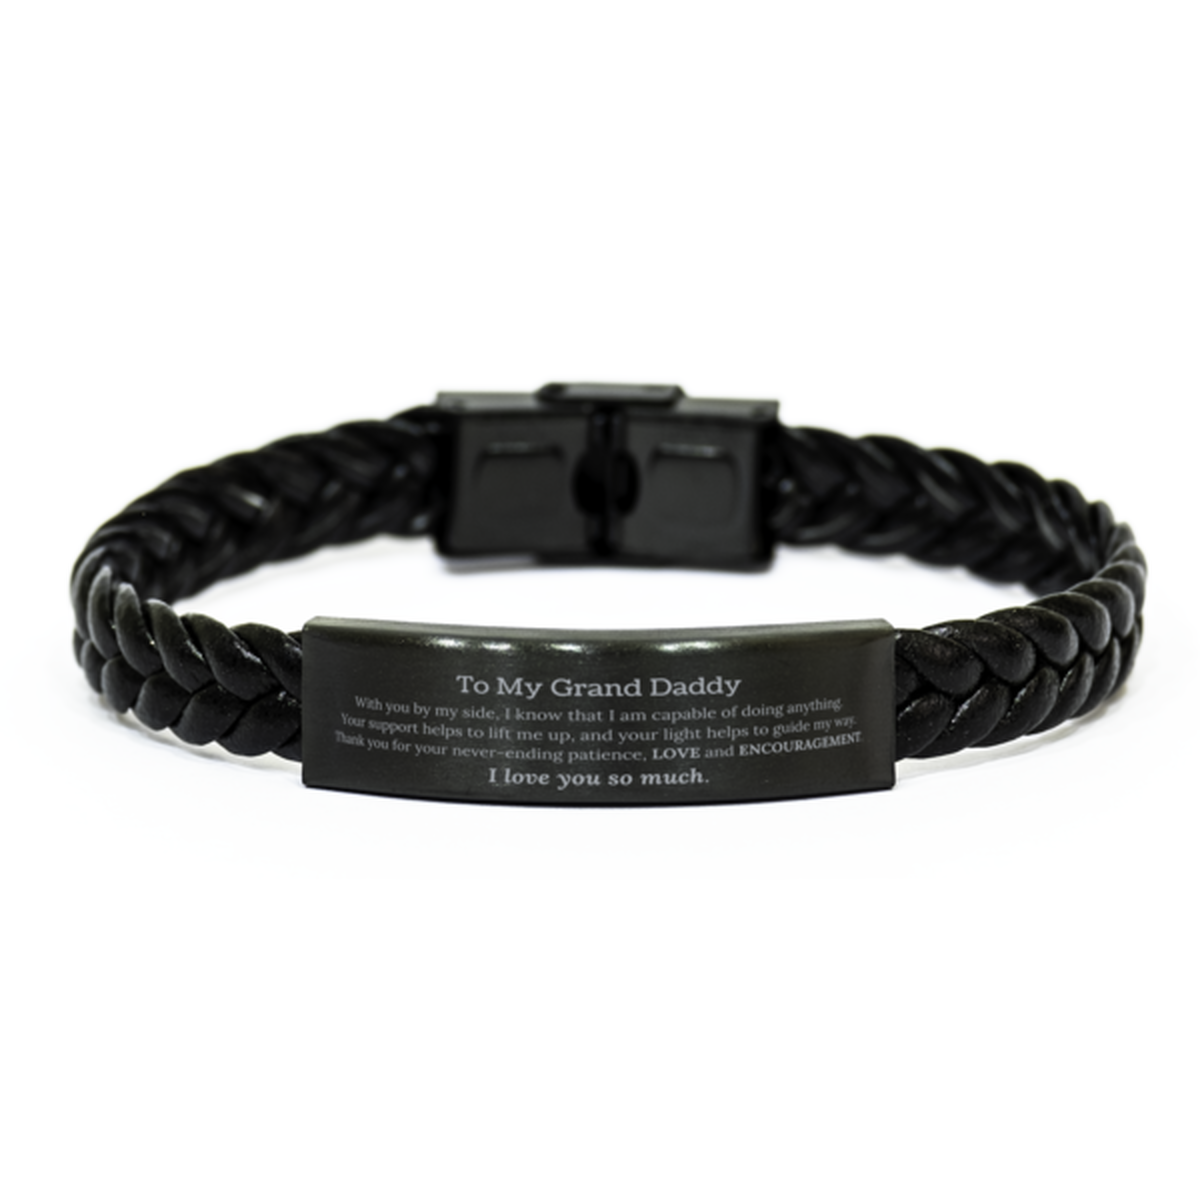 Appreciation Grand Daddy Braided Leather Bracelet Gifts, To My Grand Daddy Birthday Christmas Wedding Keepsake Gifts for Grand Daddy With you by my side, I know that I am capable of doing anything. I love you so much